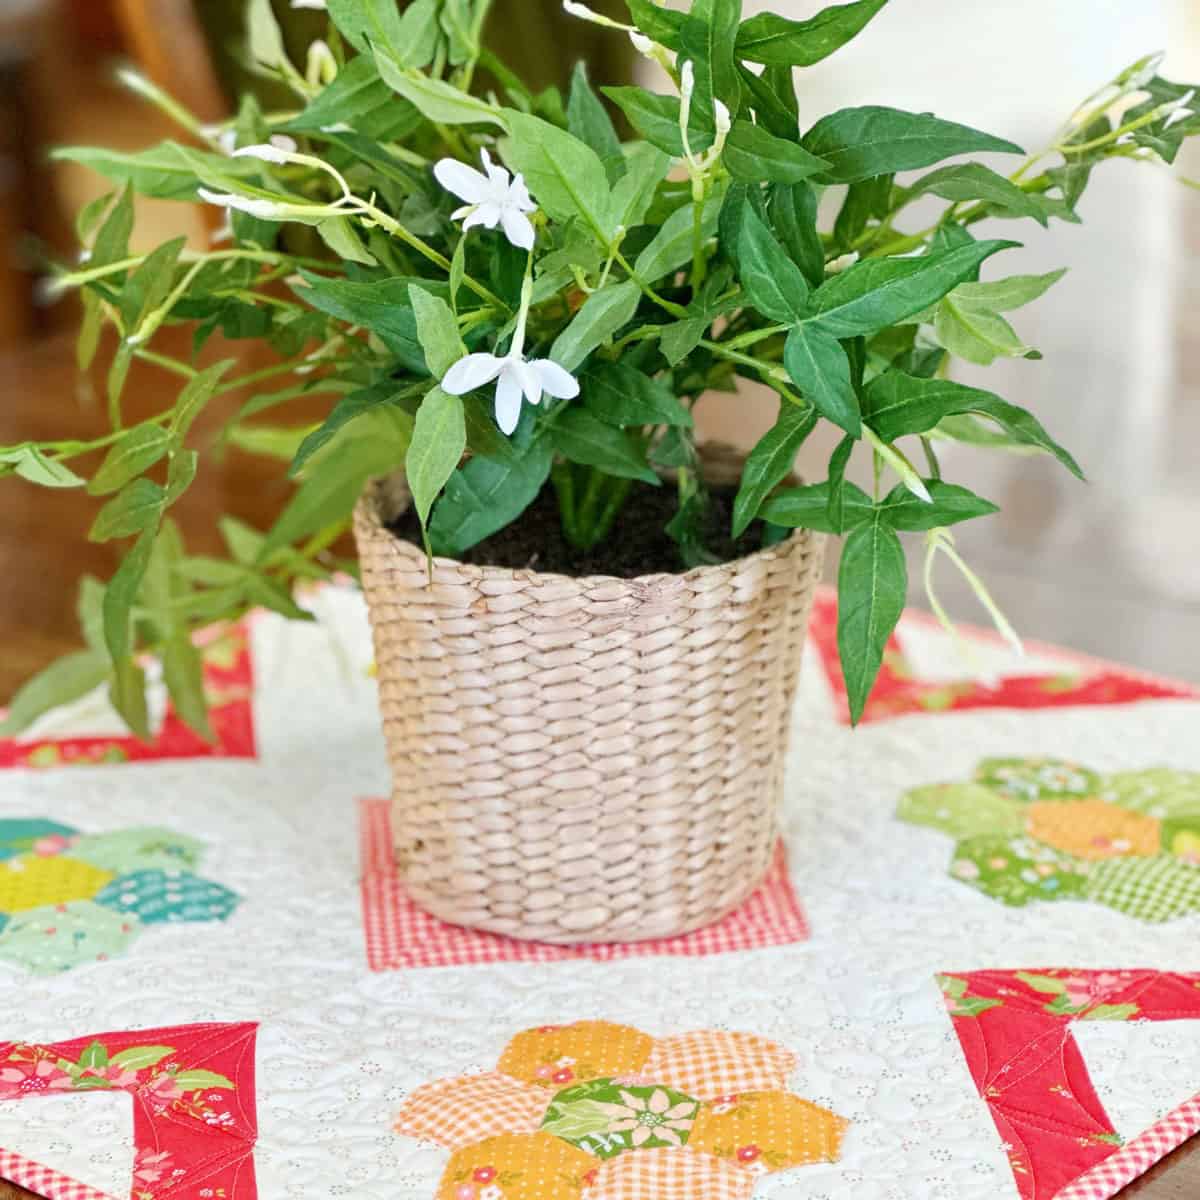 Grandmother's Flower Garden table topper in bright colors with plant on top in a wicker basket.